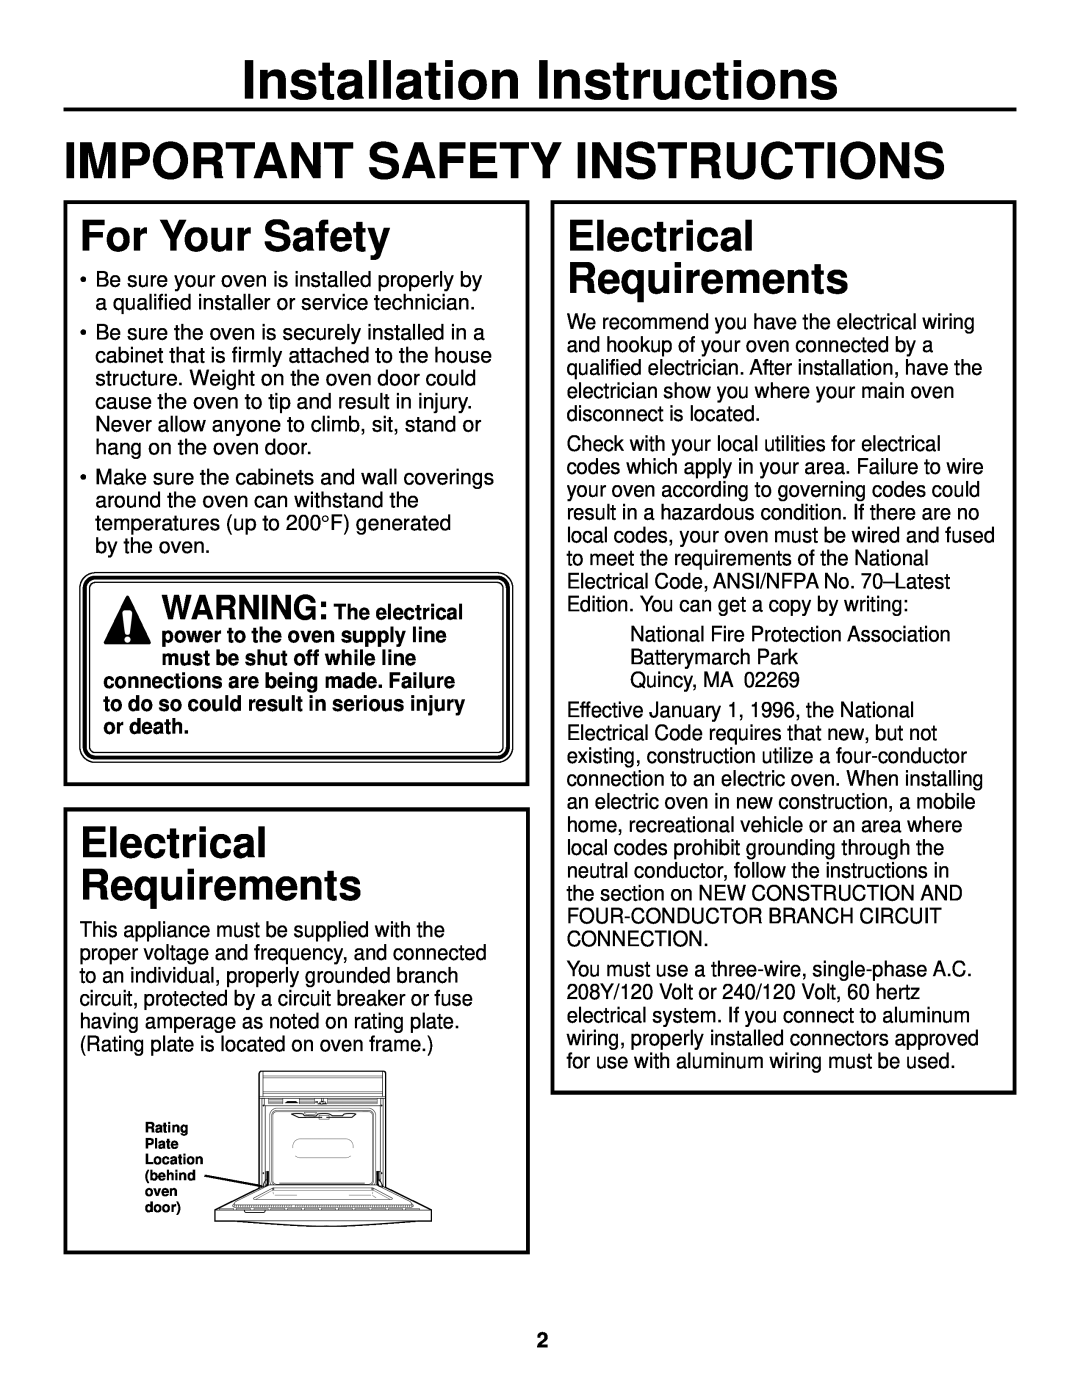 GE JTP20 Installation Instructions, Important Safety Instructions, For Your Safety, Electrical Requirements 